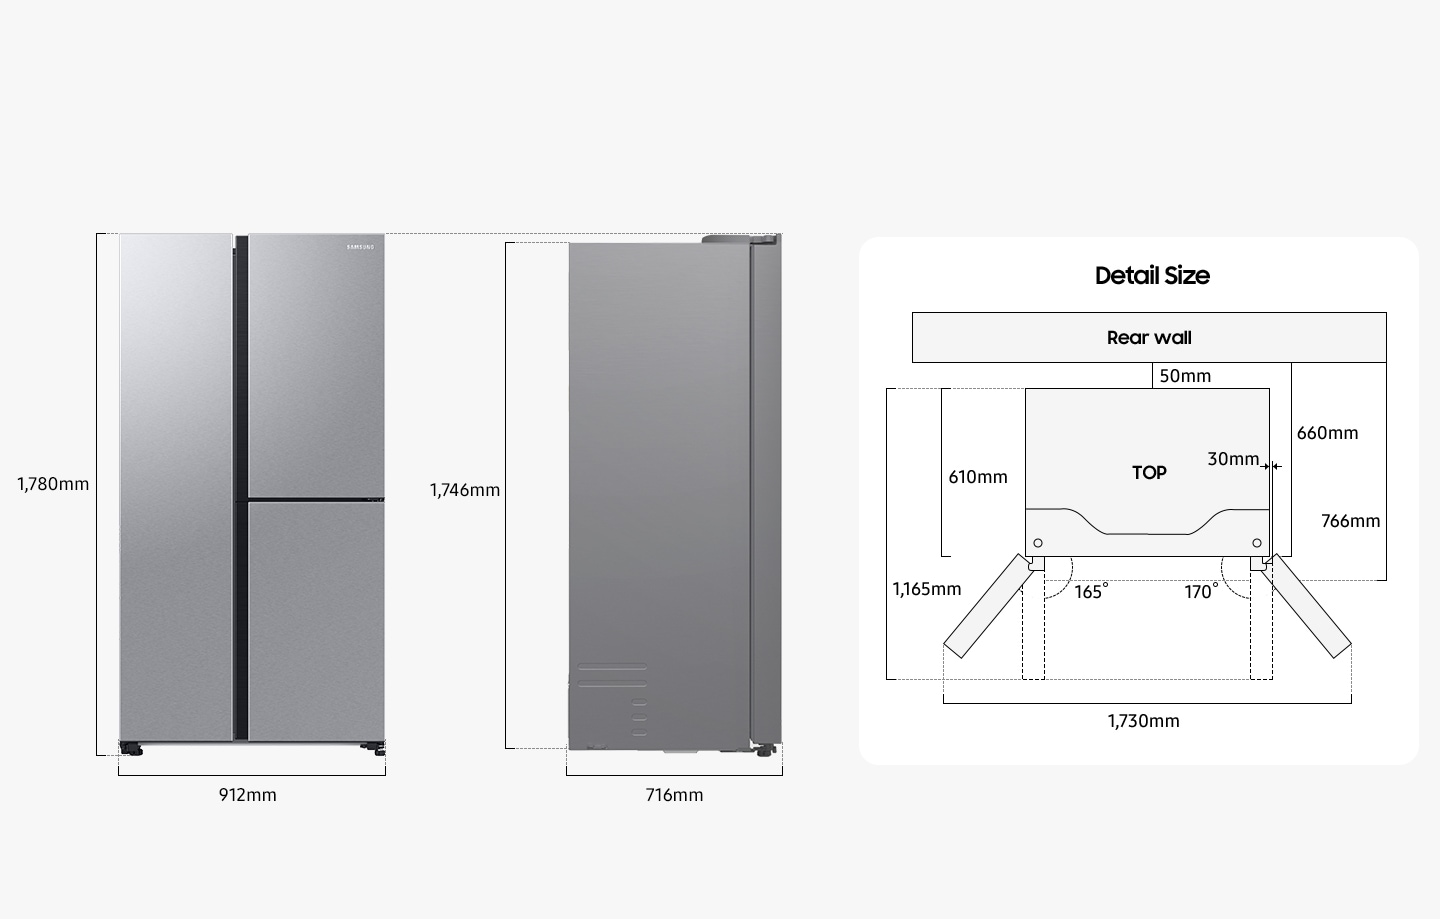 The RS8000C is 1,780mm high including the hinge, 912mm wide, 716mm deep including the handle, and 1,746mm high excluding the door from the rear. The depth including the space between the refrigerator and the back wall and the refrigerator body is 660mm, and the depth including the space between the refrigerator and the back wall and the refrigerator body and the refrigerator door is 766mm.  The depth of installed Refrigerator excluding the door closed is 610mm. The left door can be opened 165 degrees maximum to the left, and the right door can be opened 170 degrees maximum to the right. When both doors are opened to the max, the total width is 1,730mm. When both doors are opened to 90 degrees, the total depth is 1,165mm and the refrigerator door protrudes 30mm from the refrigerator body. When installed, RS8000C needs more than 50mm of space from the rear wall.